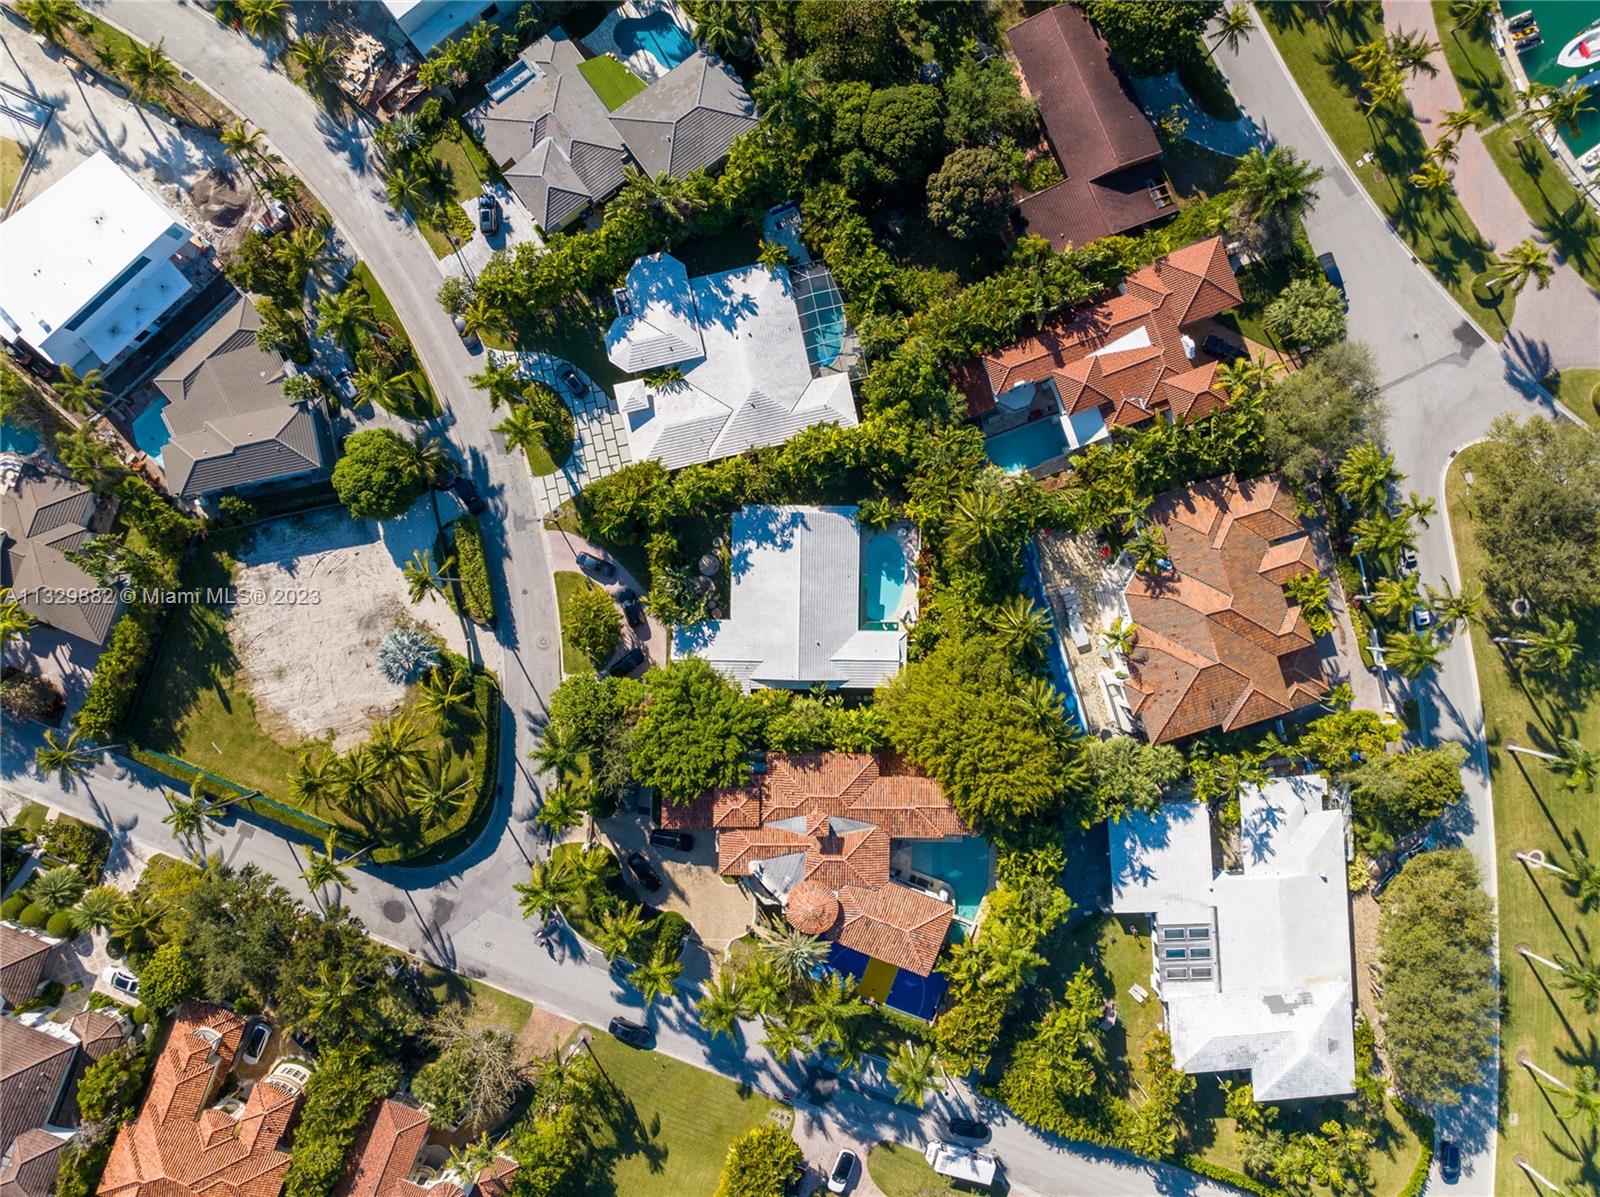 Build your dream home on an oversized 14,300 square-foot lot in one of the most coveted and private neighborhoods in South Florida: Bal Harbour Village.
Existing home is 3,648 sf - 4 bedroom 4 bathroom and is currently rented.